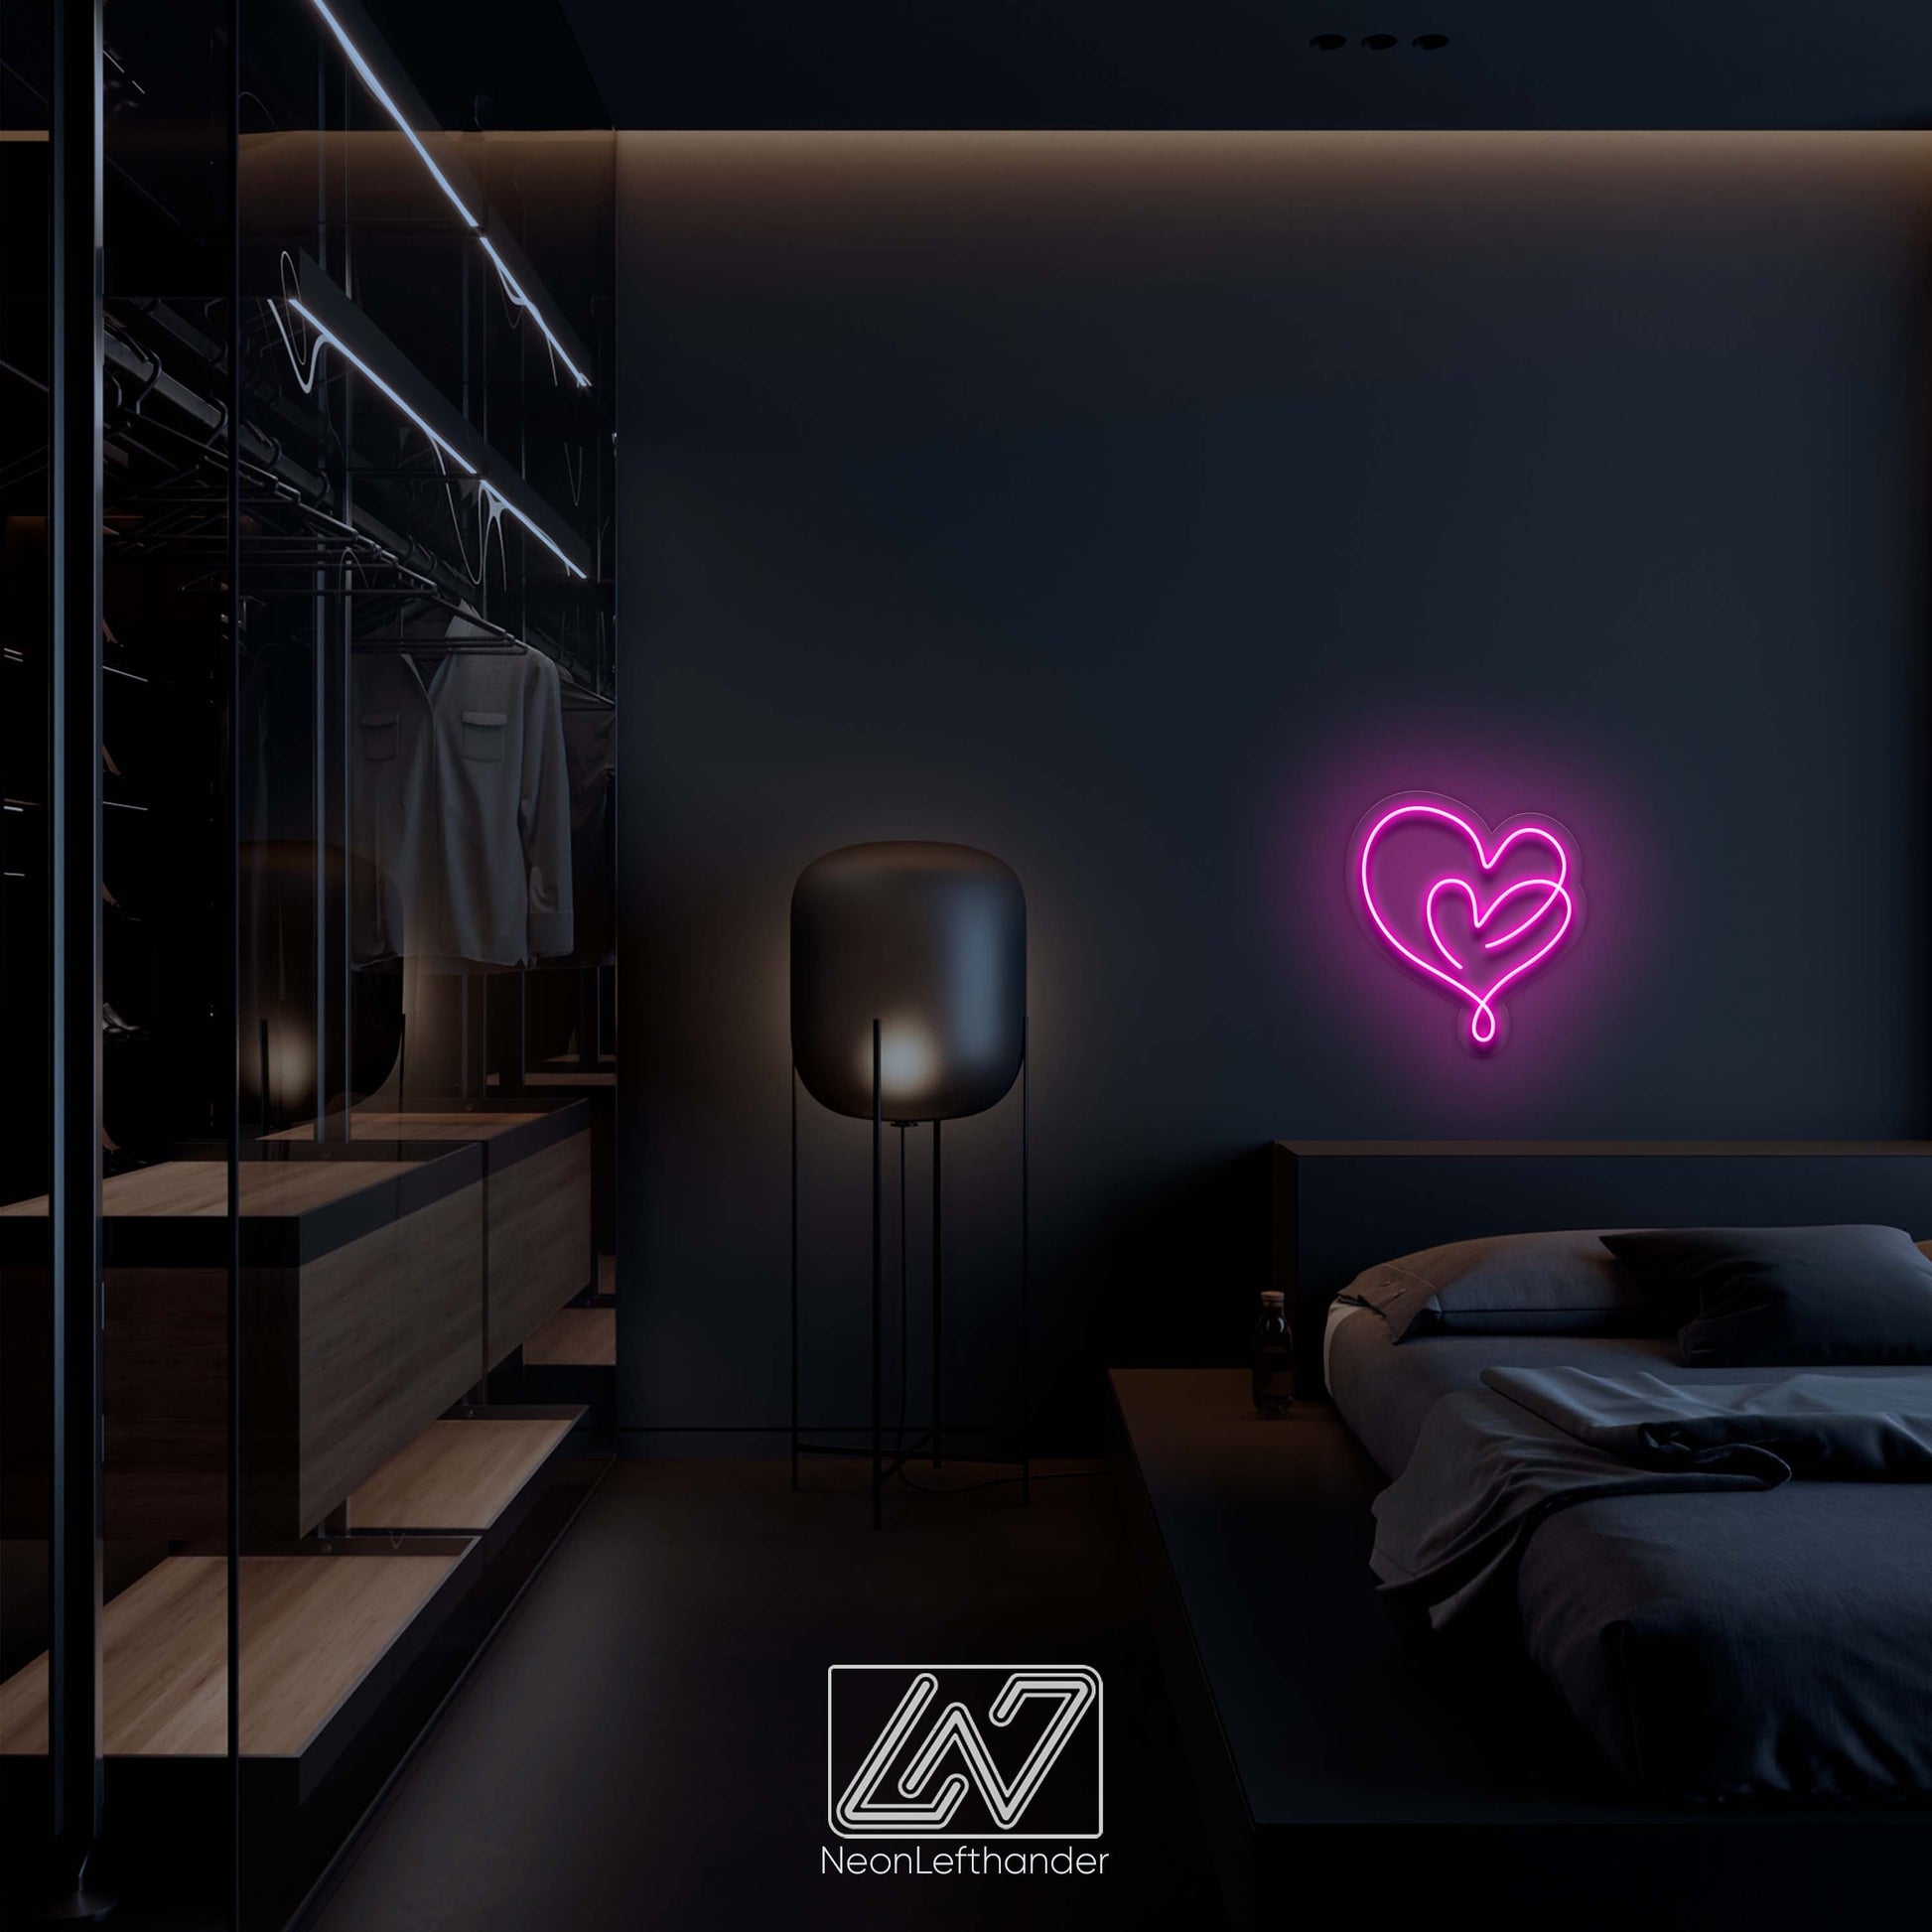 Hearts - LED Neon Sign, Romantic Gift for Valentine's Day and Stylish Decor Element for Bedrooms and a Chic Addition to Wedding Ambiance